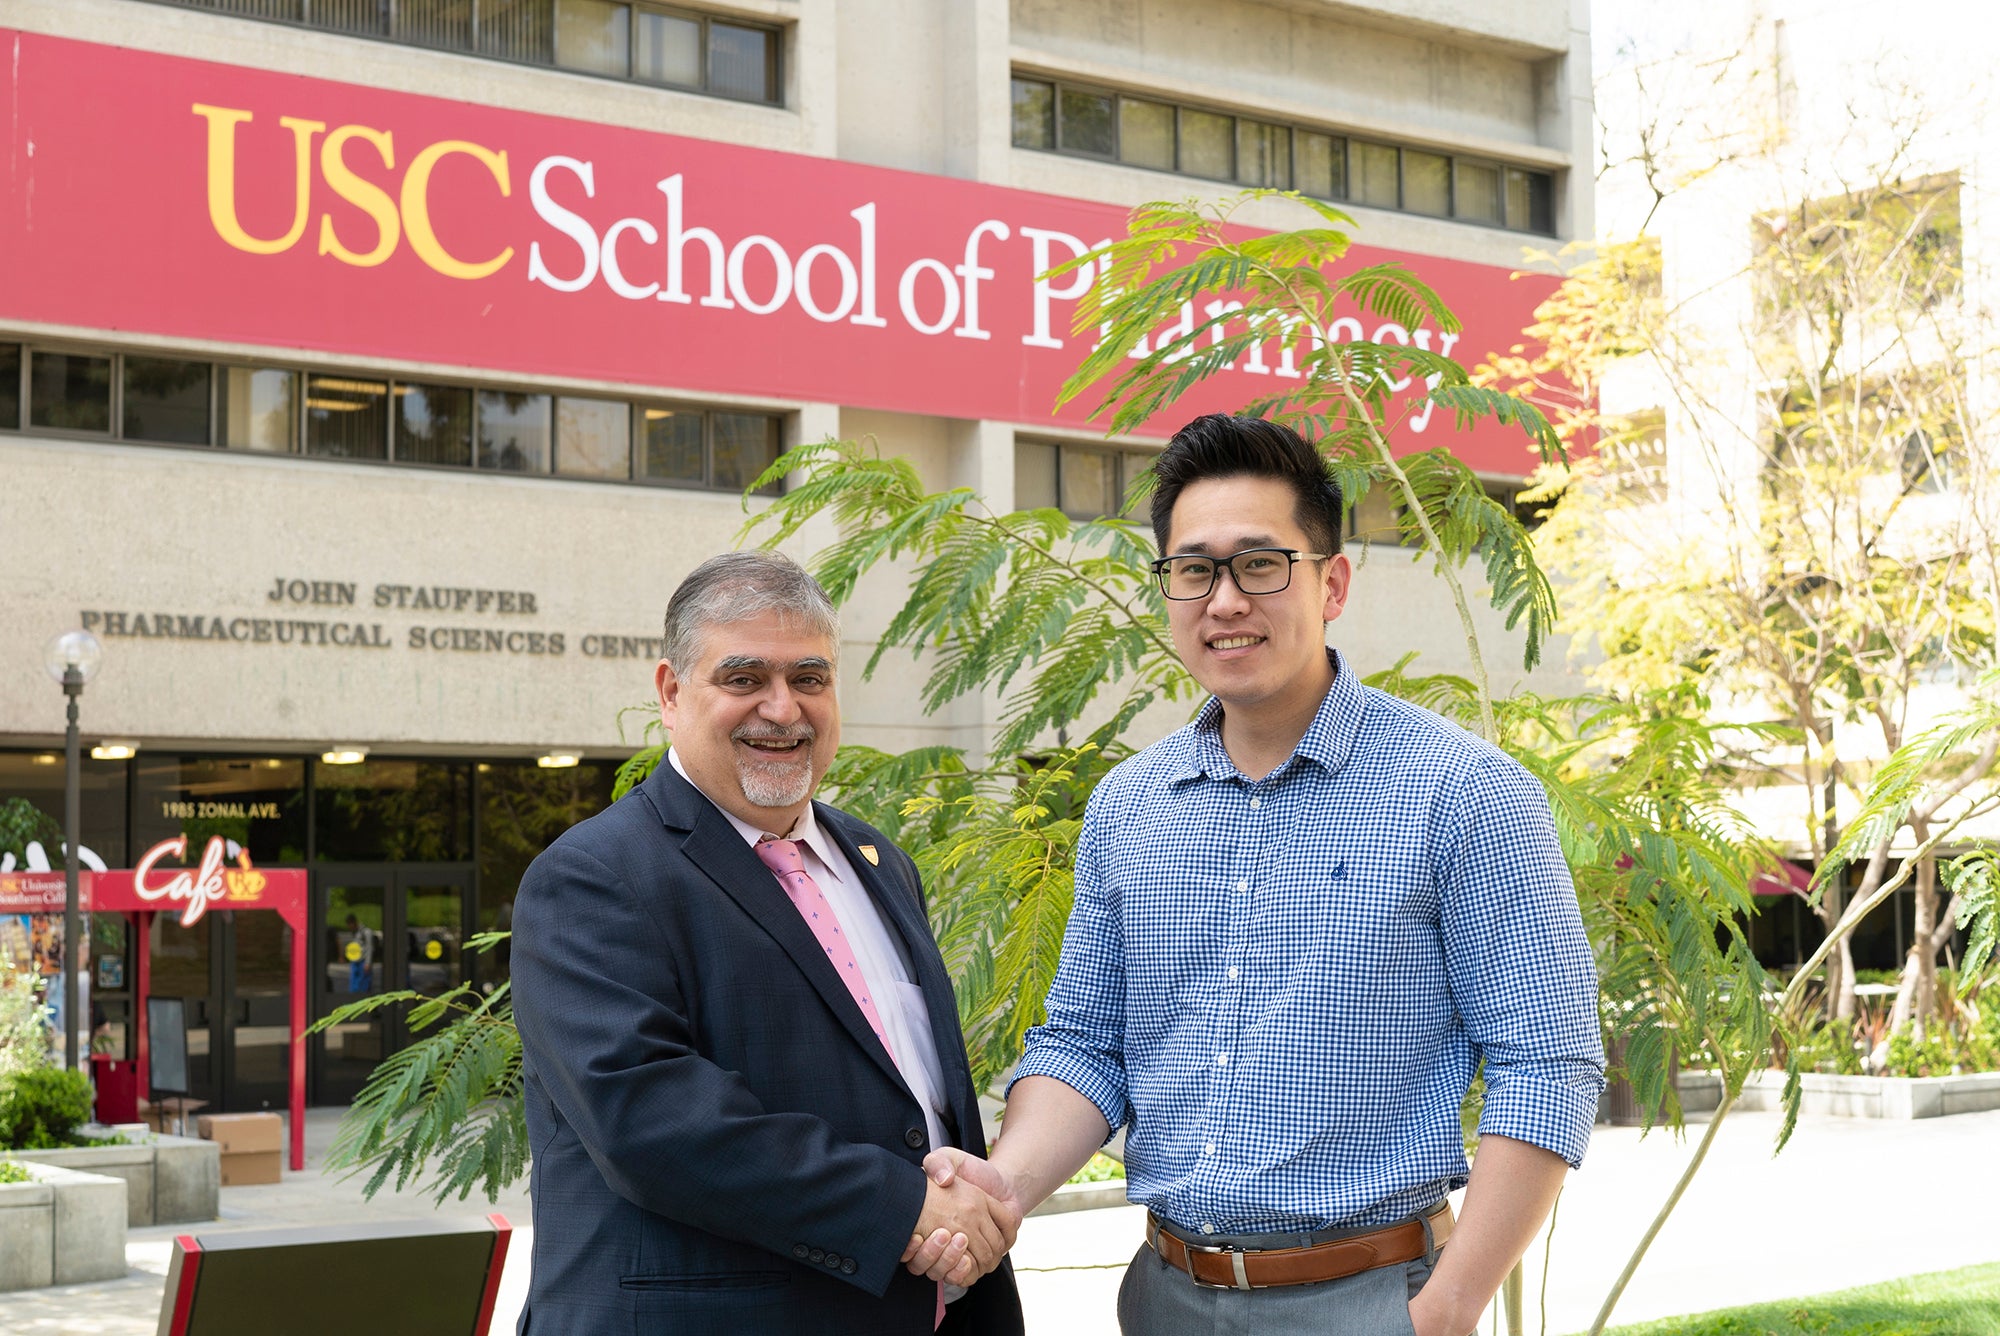 Morning Recovery Donates to USC School of Pharmacy.